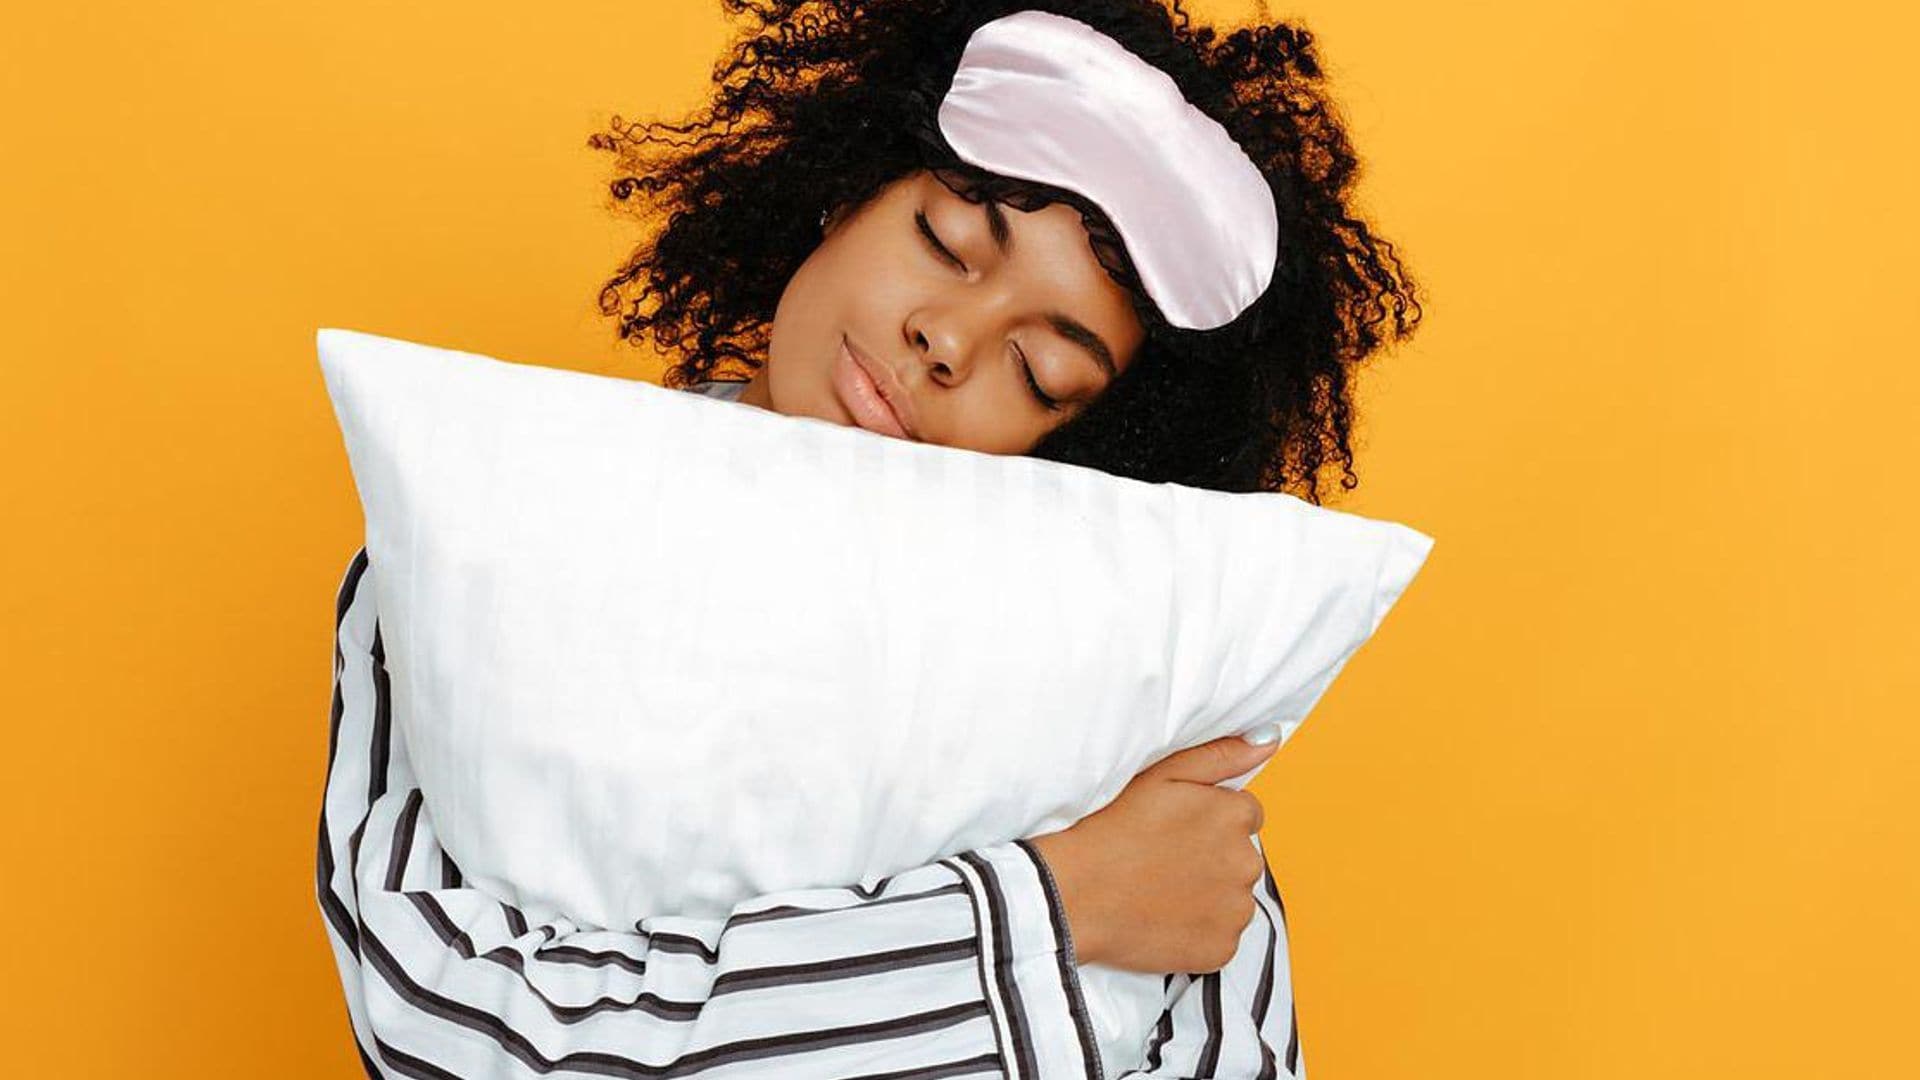 8 tips for transforming your rest into health and beauty